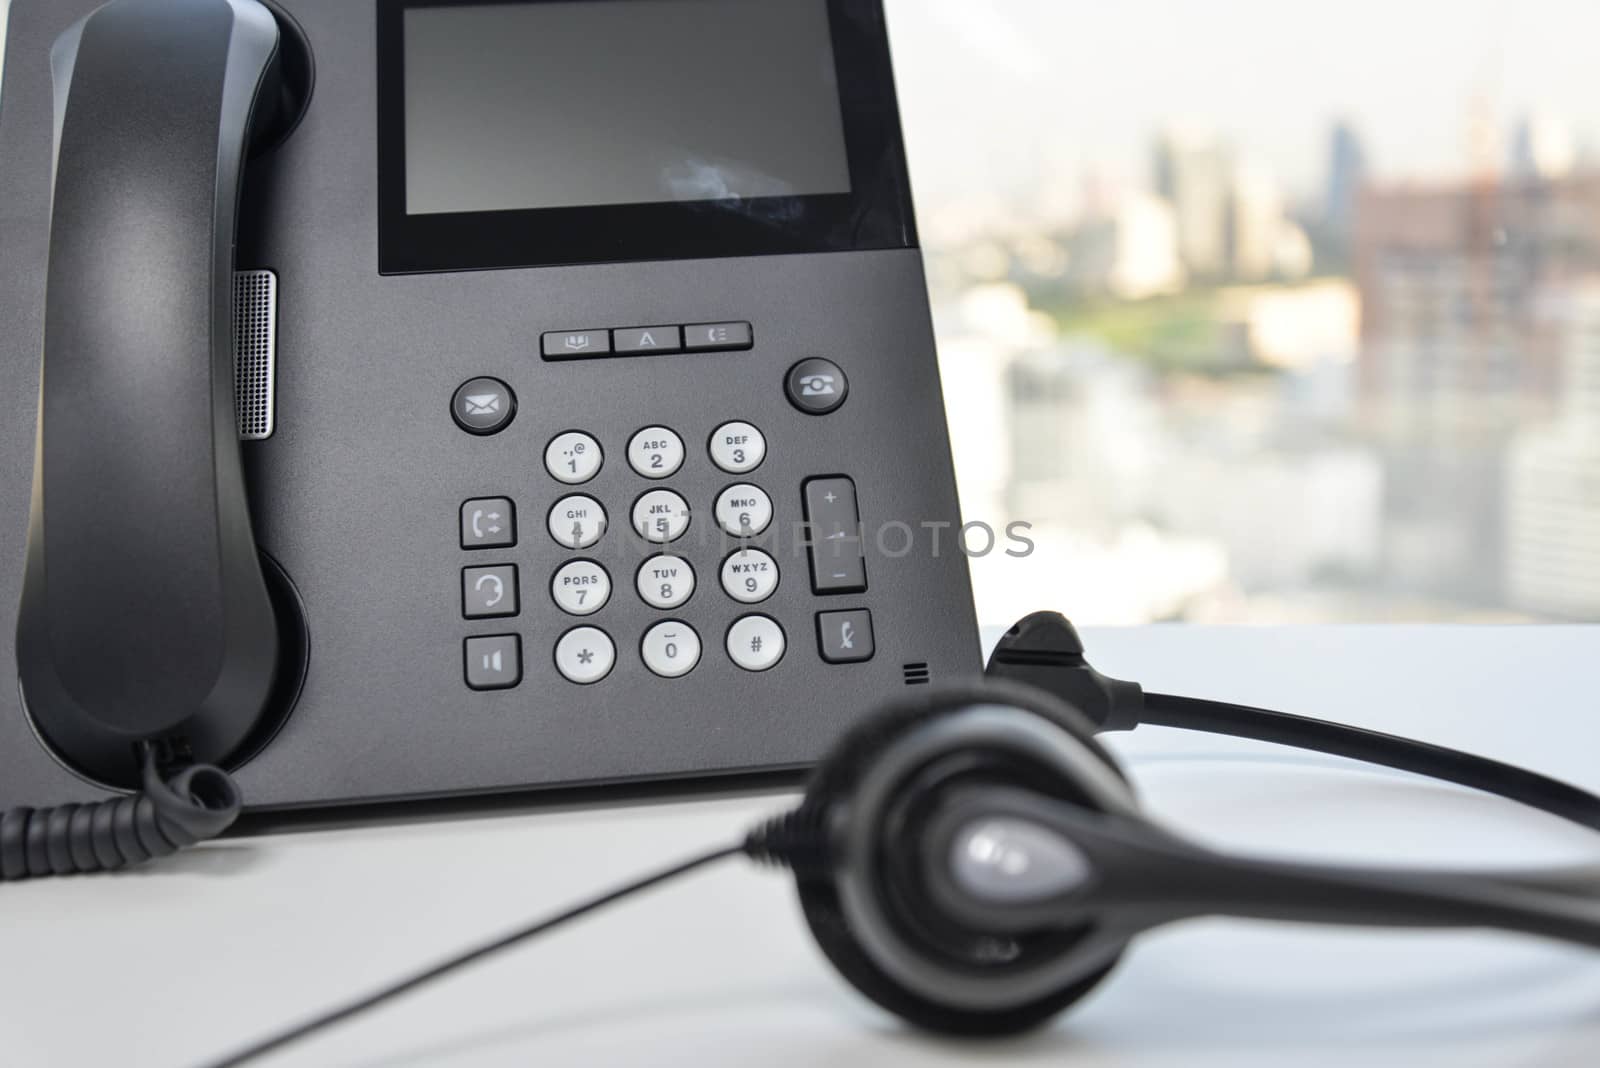 IP Phone Headset by Magneticmcc